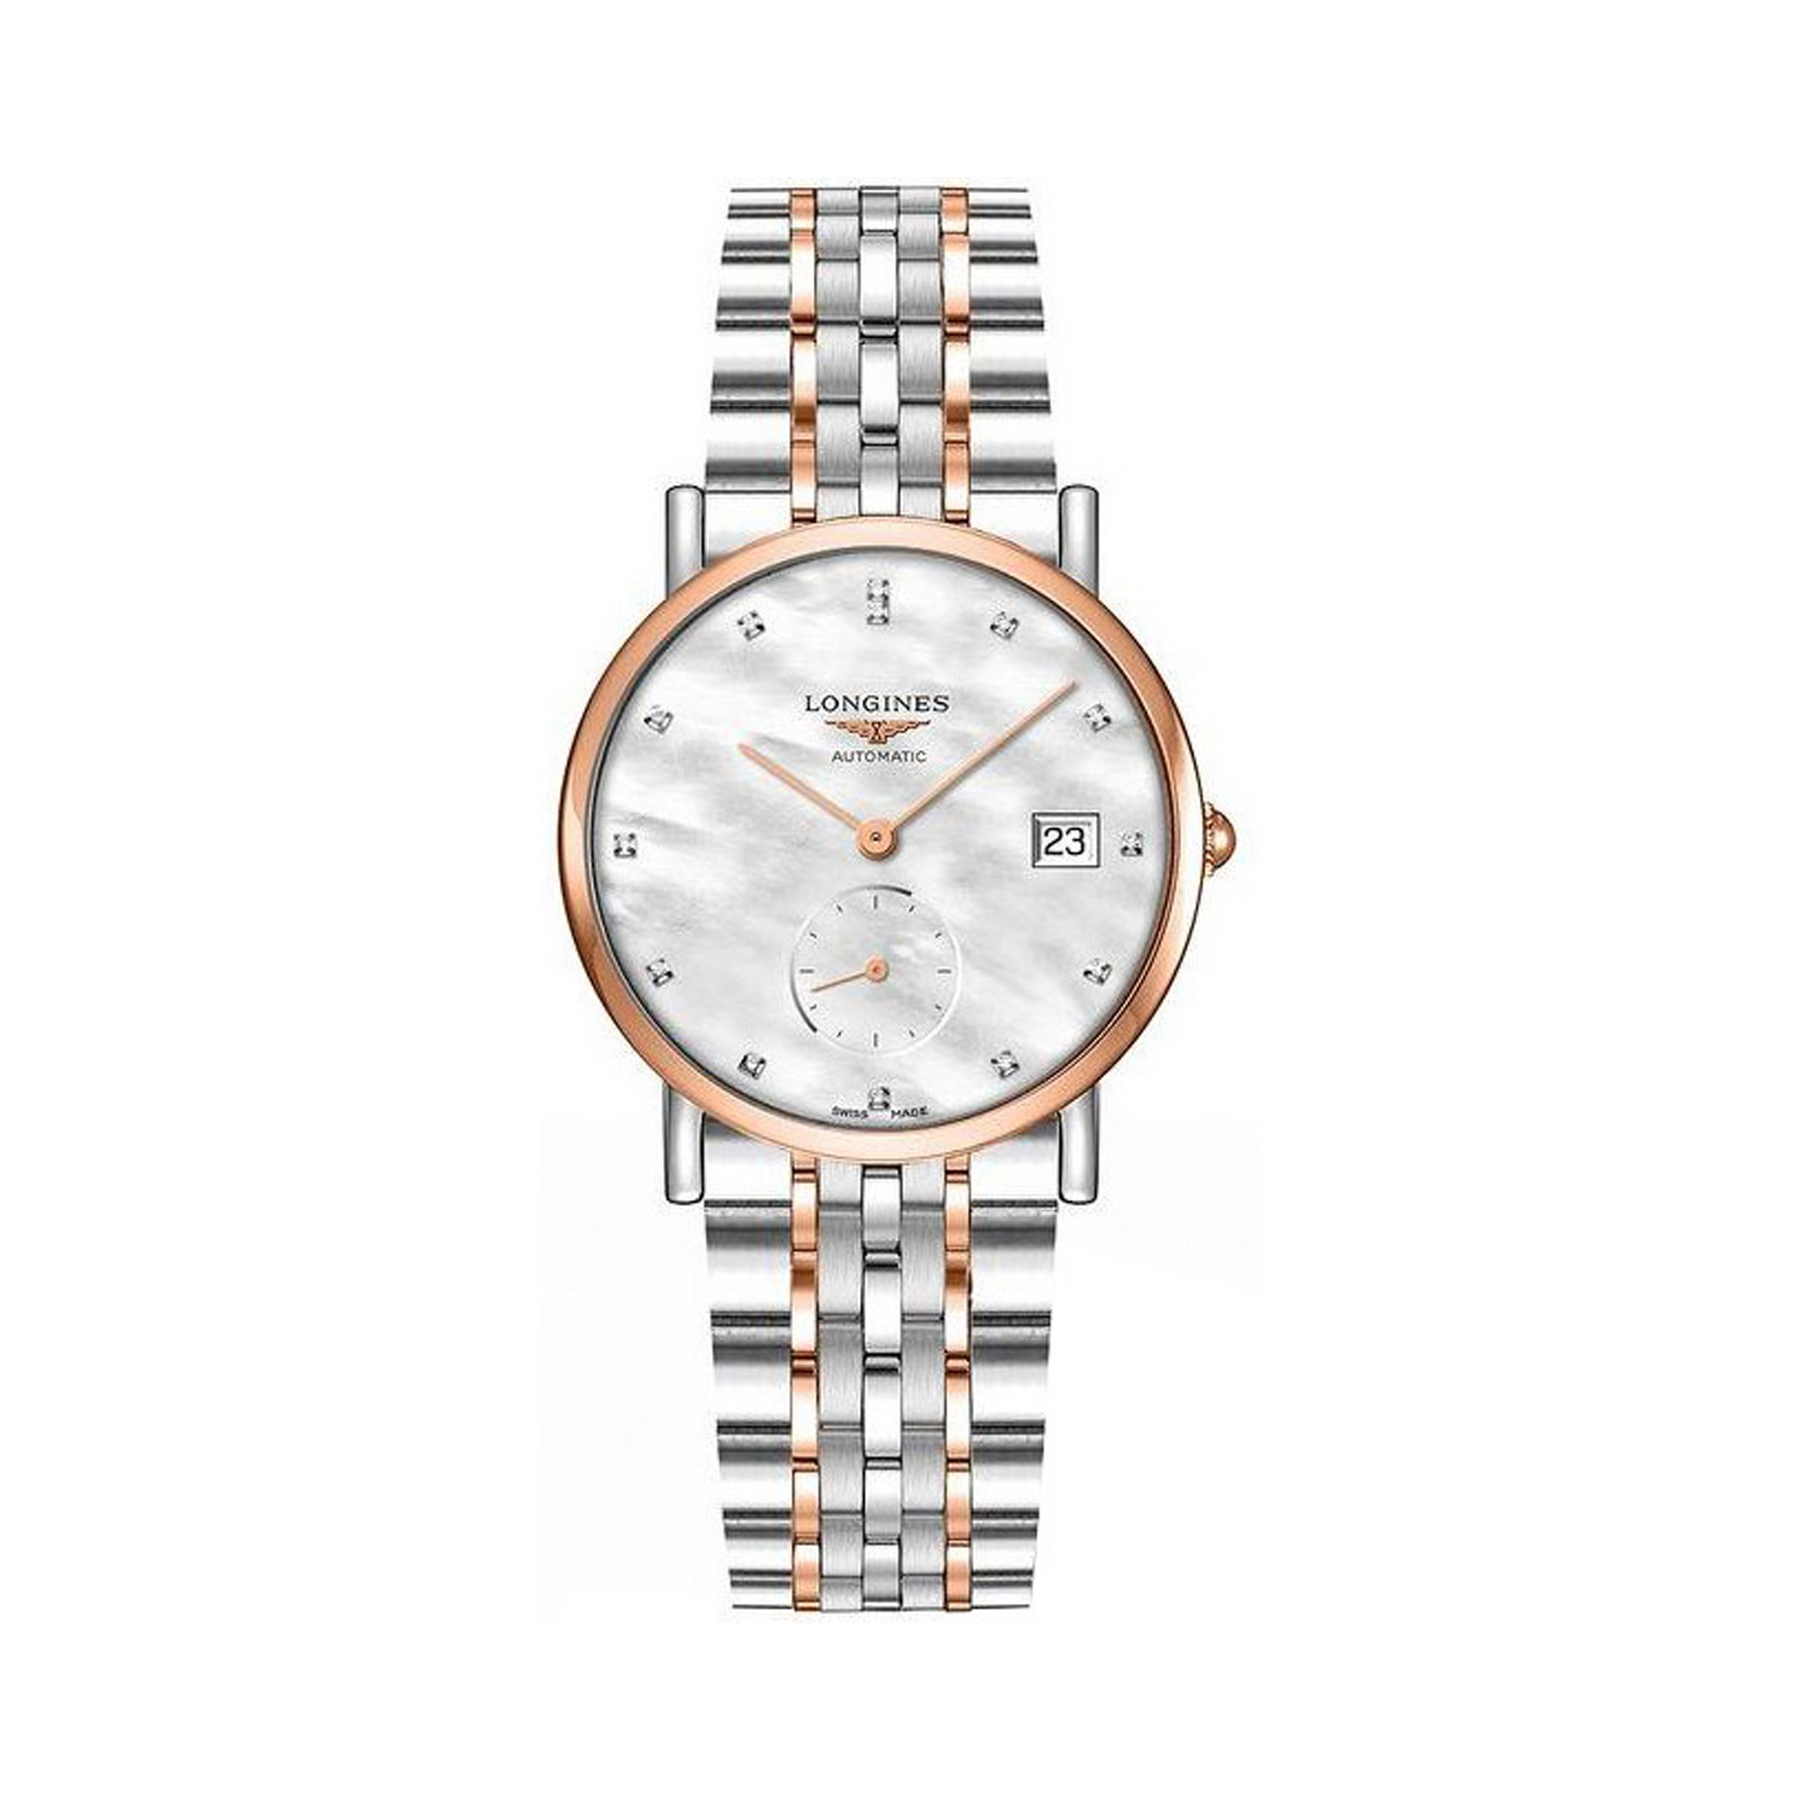 Longines Elegant Women's 34.50mm Stainless Steel and 18ct Rose Gold Automatic Watch L4.312.5.87.7